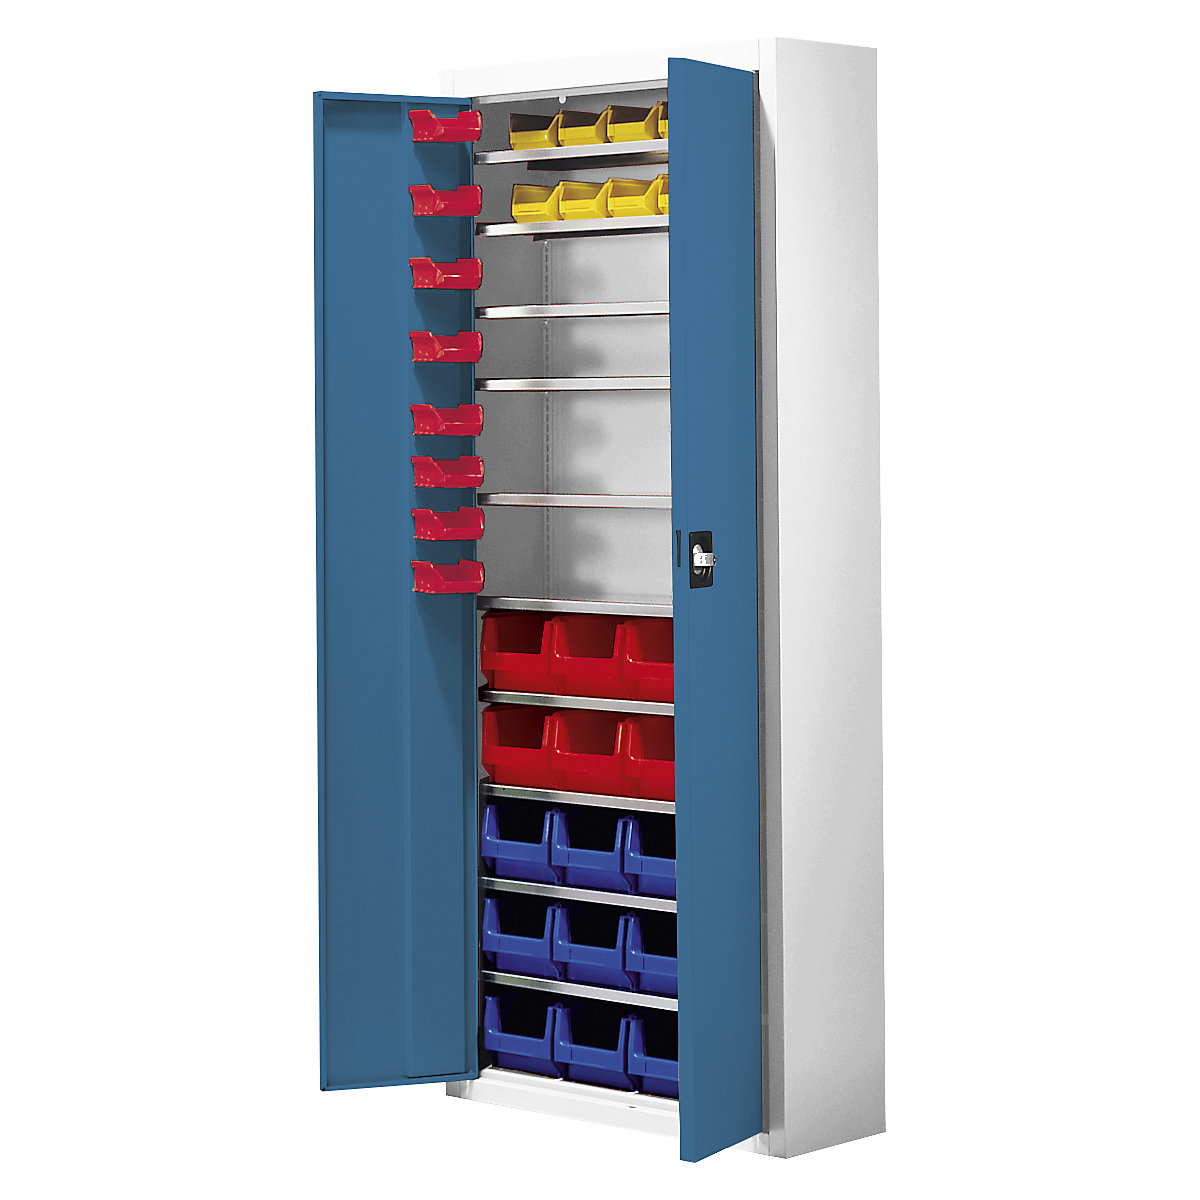 Storage cupboard with open fronted storage bins – mauser, HxWxD 1740 x 680 x 280 mm, 48 bins, two-colour, grey body, blue doors-3